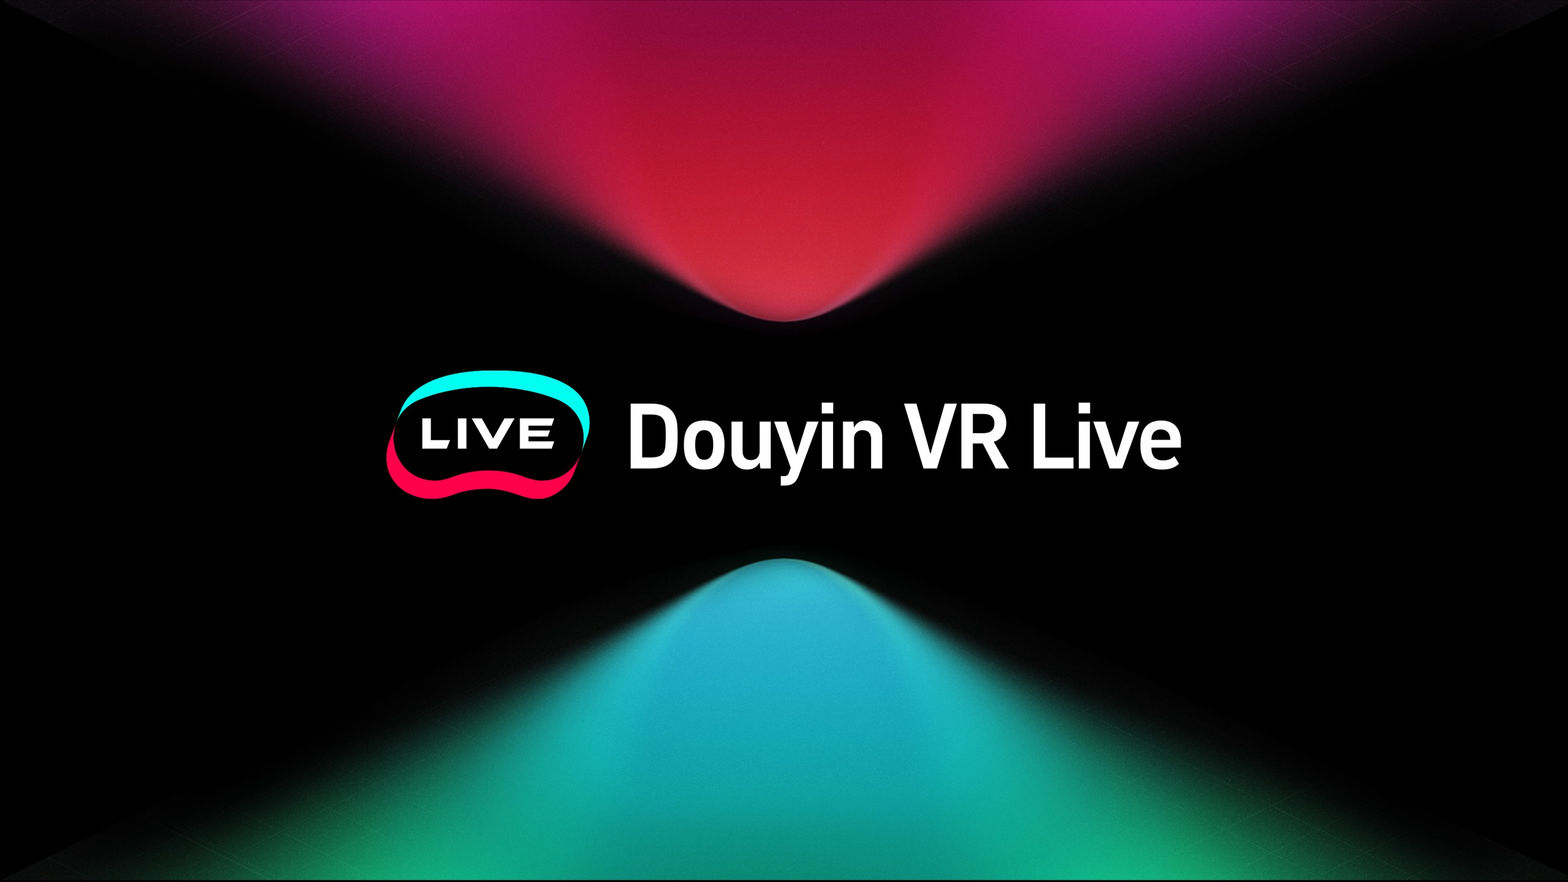 Douyin VR Live